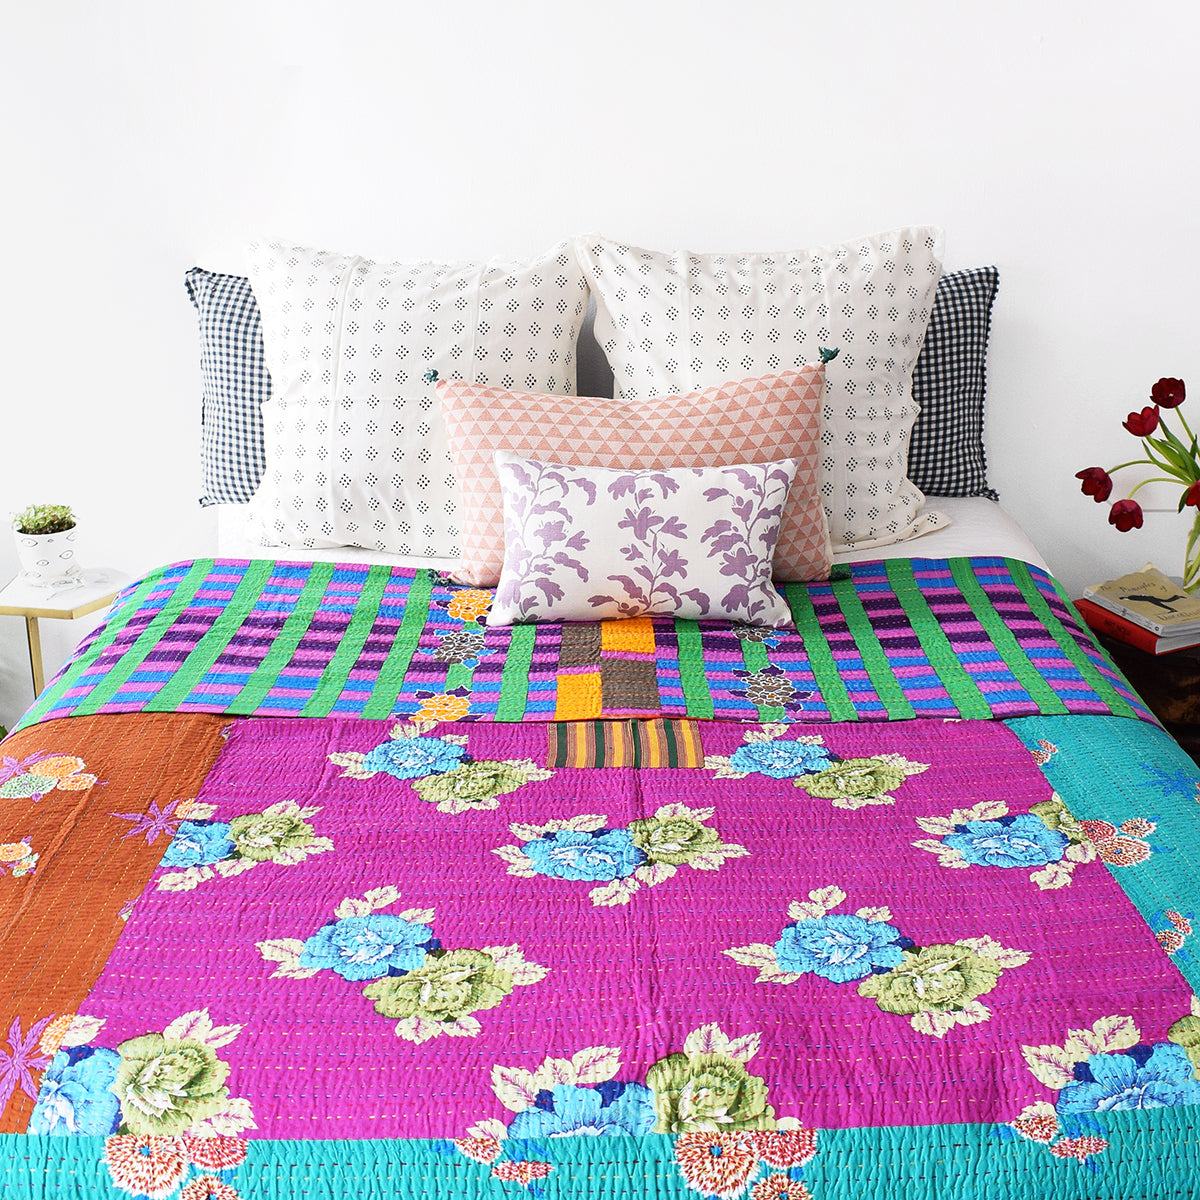 Linge Particulier Anthracite Gingham Standard Linen Pillowcase Sham with a Lisa Corti Gudri kantha quilt for a colorful linen bedding look in dark check gingham - Collyer's Mansion